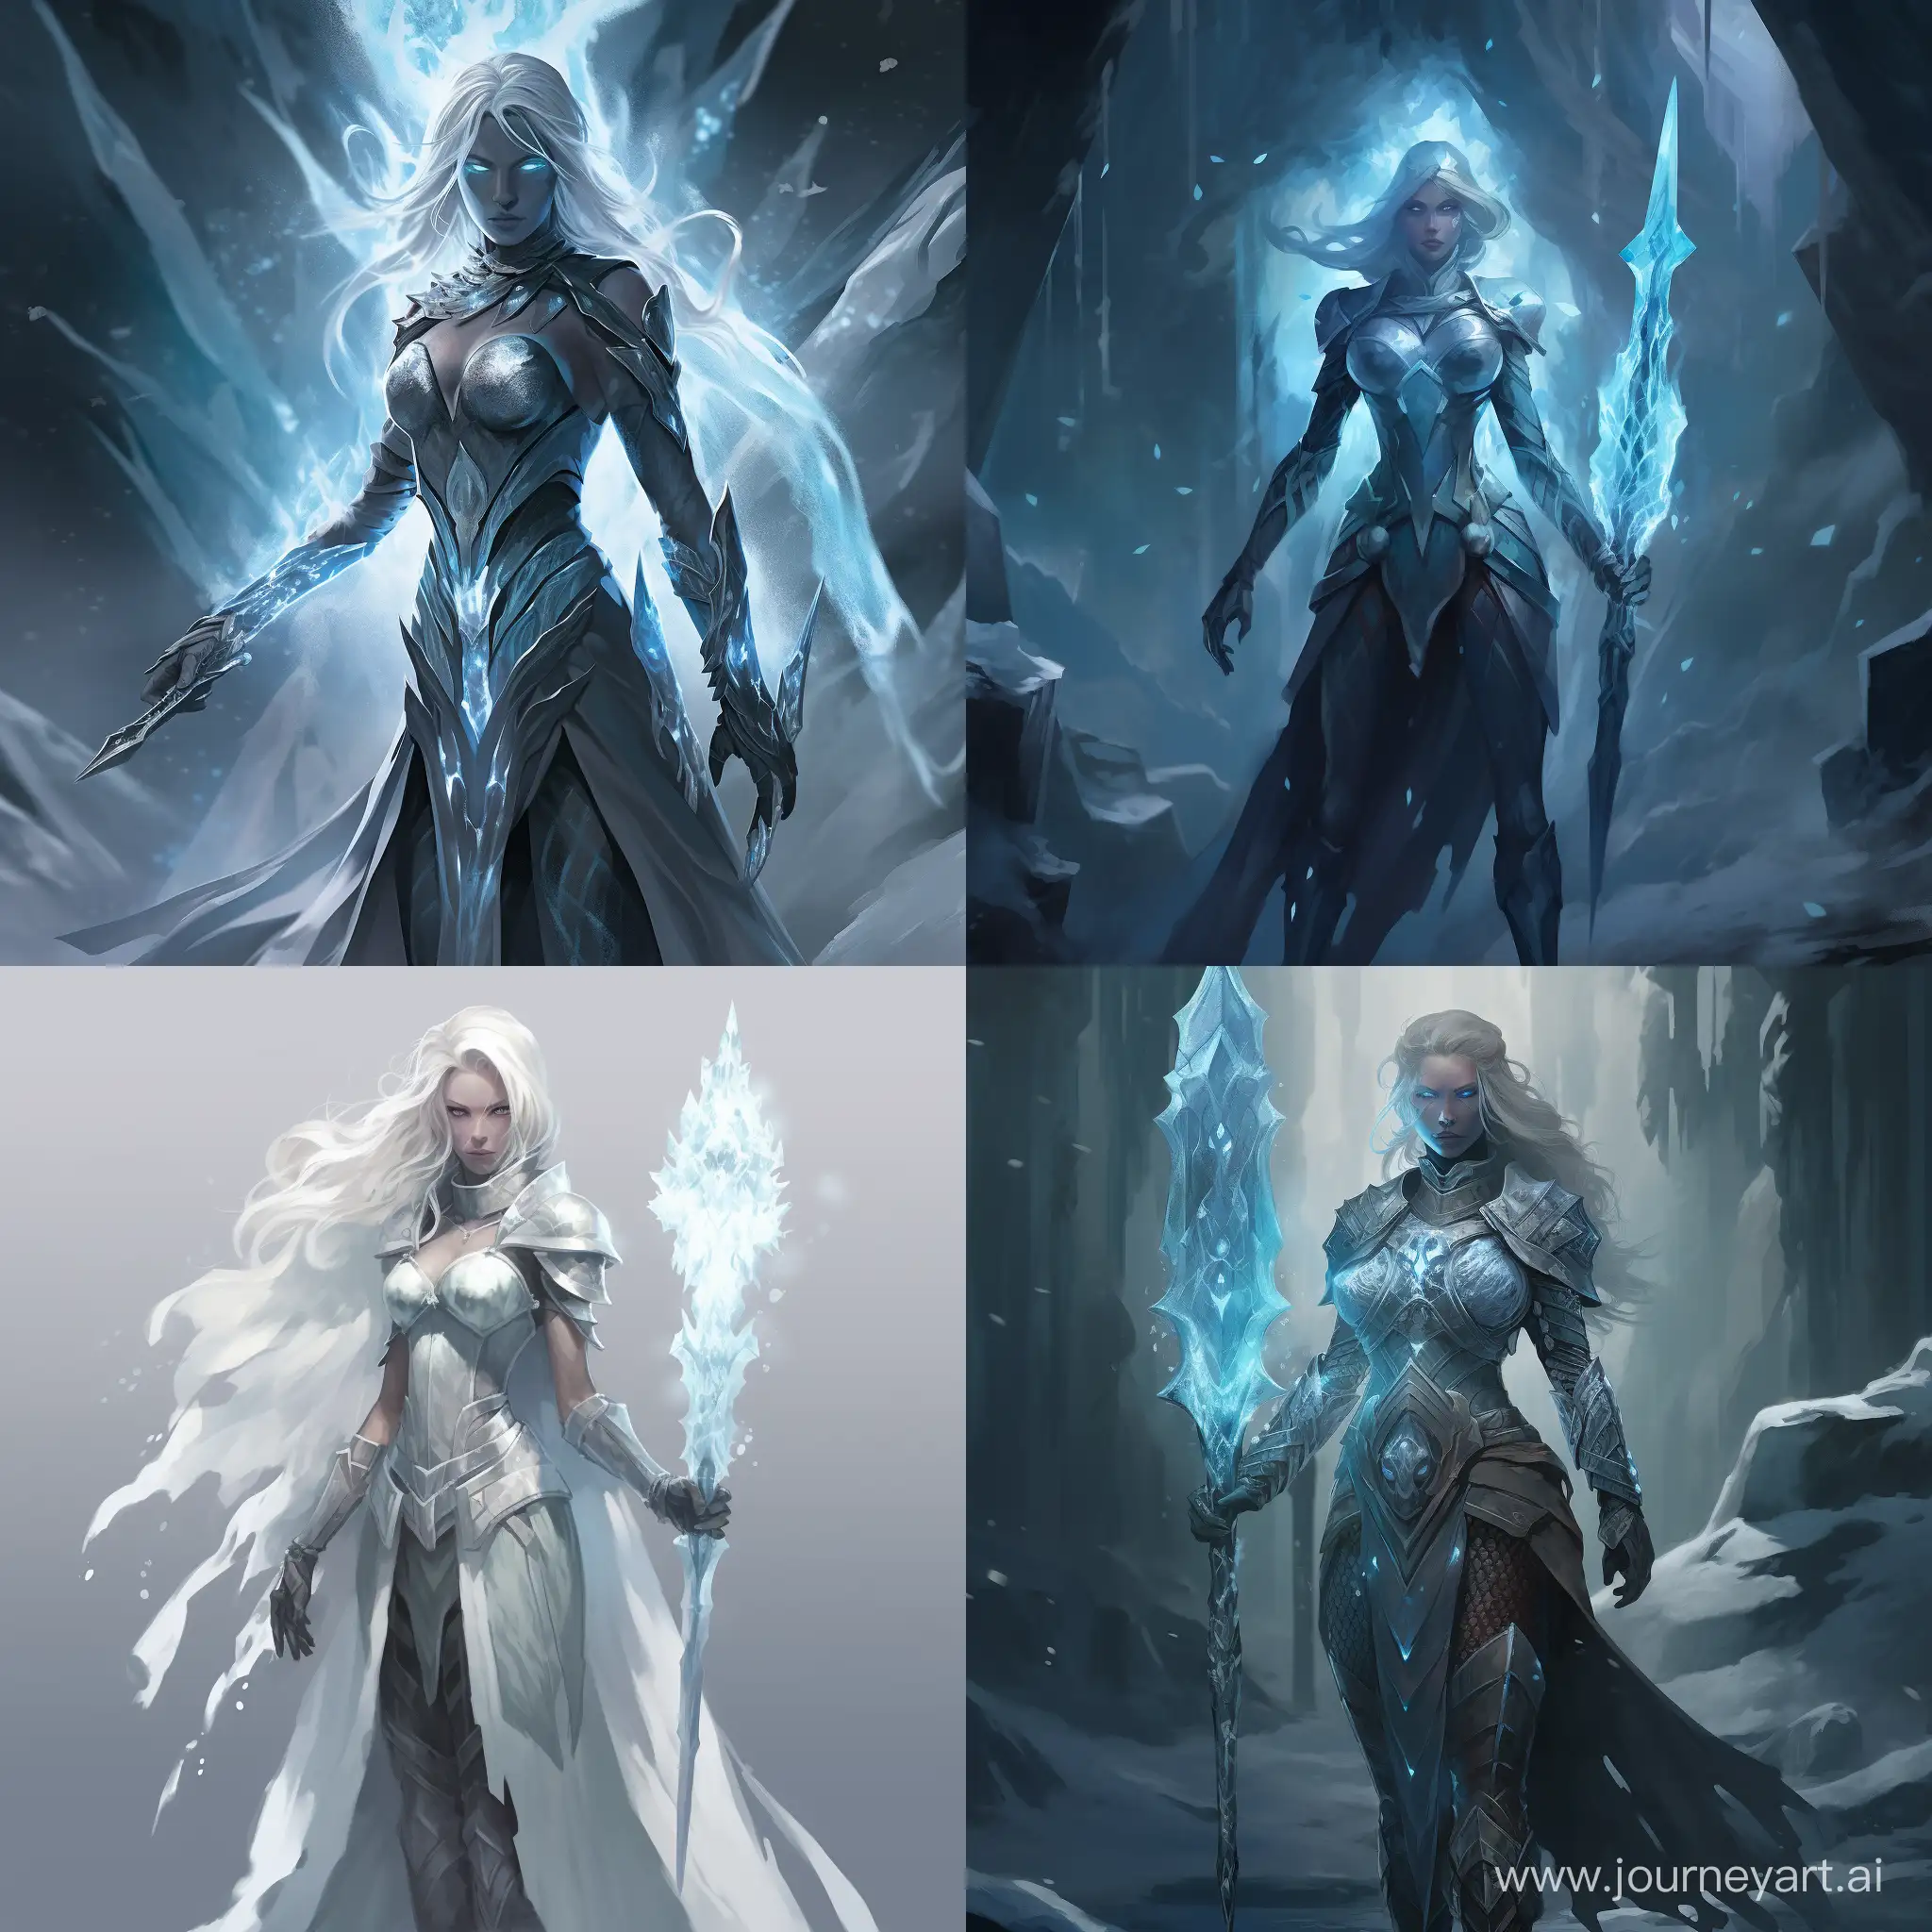 Elemental-Ice-Warrior-with-Icy-Spear-in-Combat-Stance